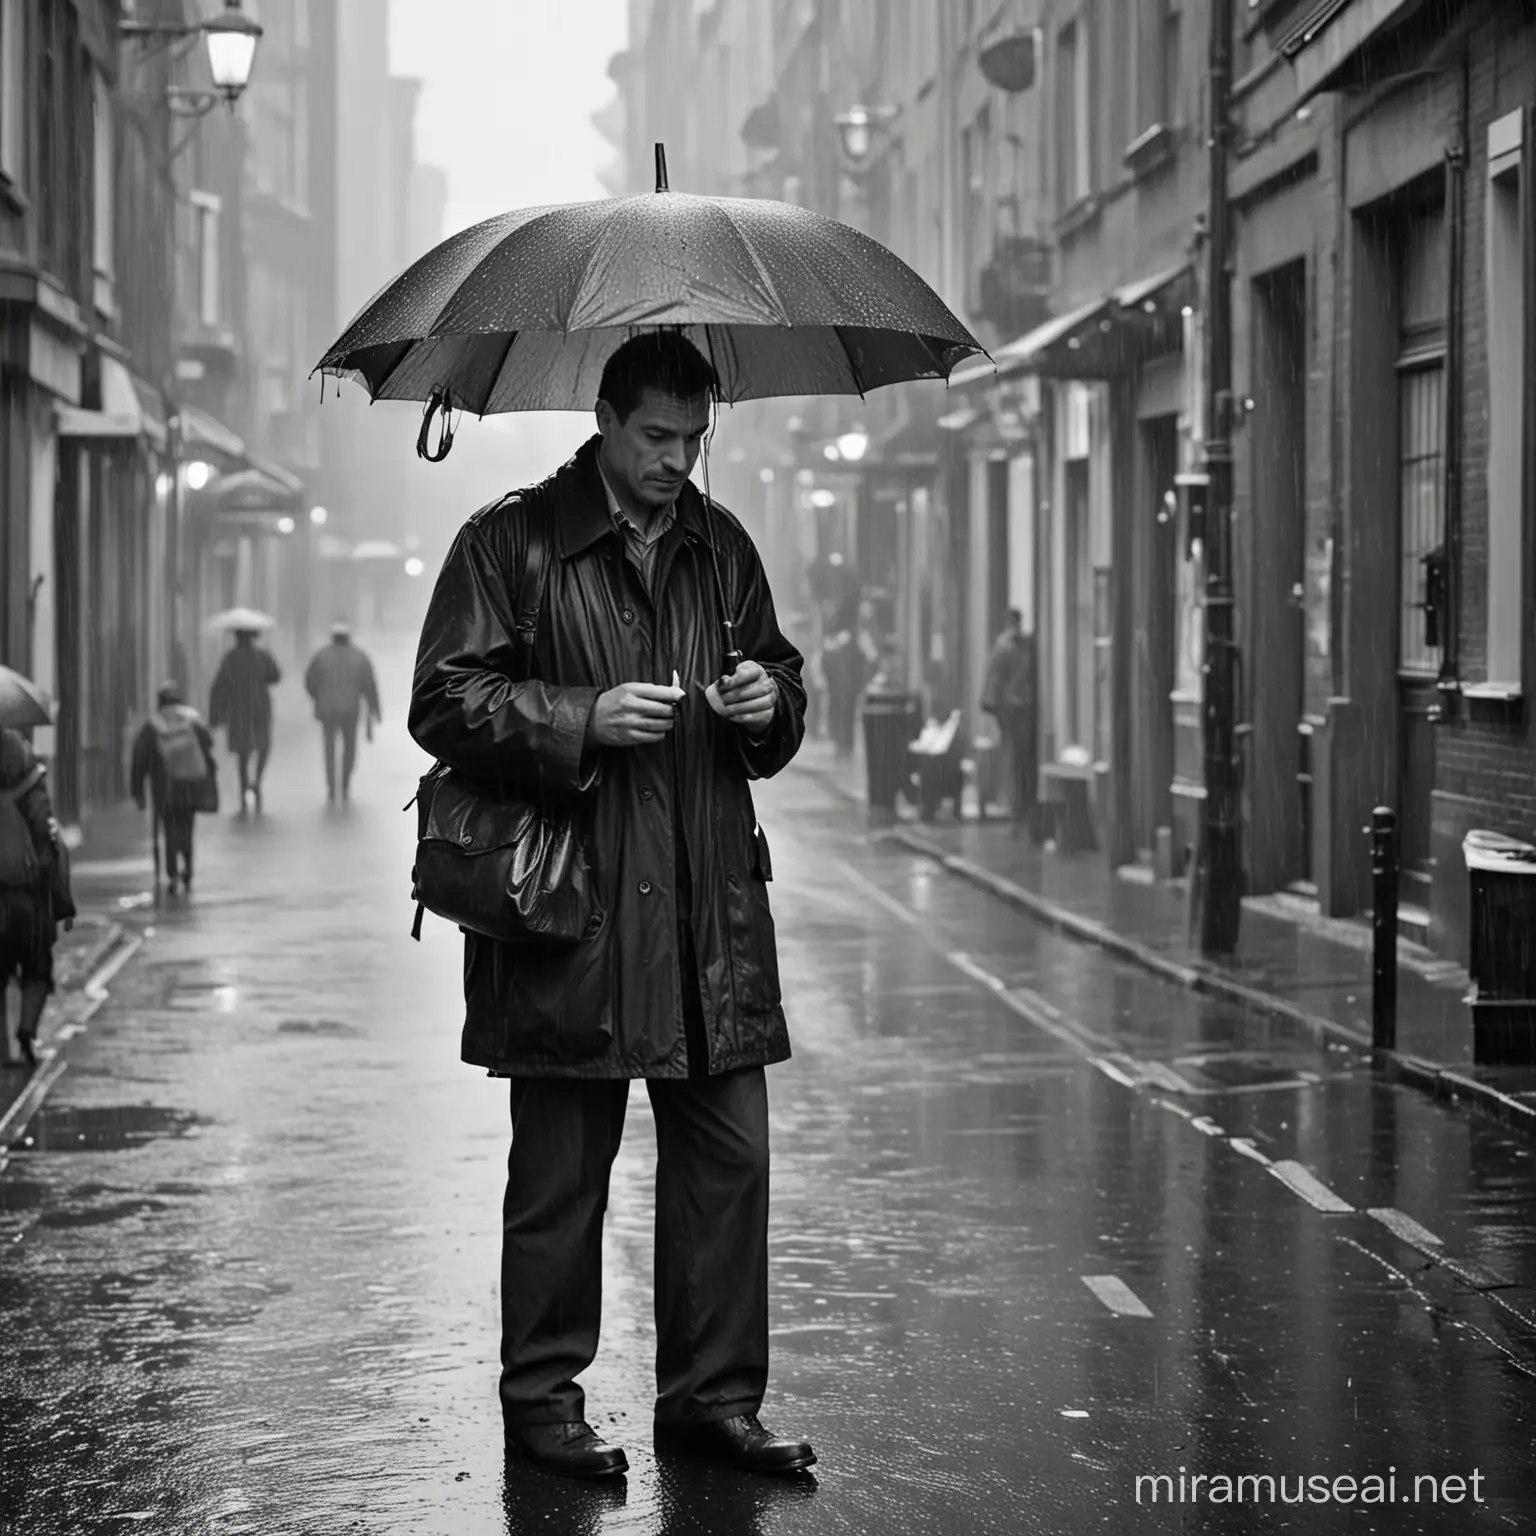 Man with Umbrella and Hard Disk in Rain Capturing Resilience in a Moment